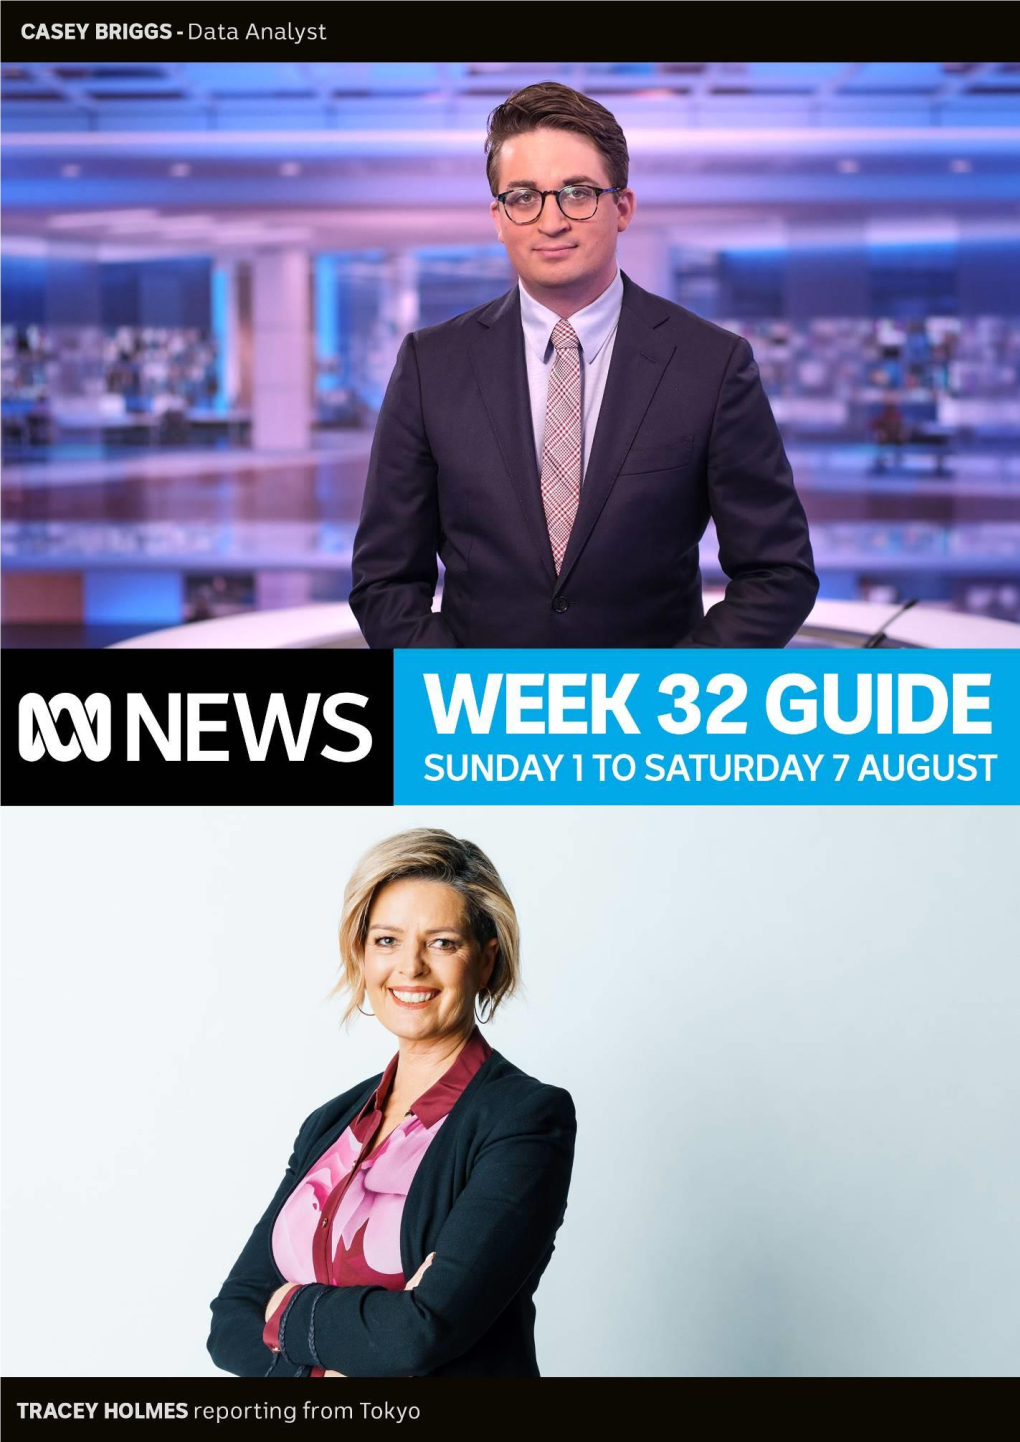 ABC NEWS Channel Airs Live Across Australia So Programs Air 30 Minutes Earlier in SA + NT, and 2 Hours Earlier in WA